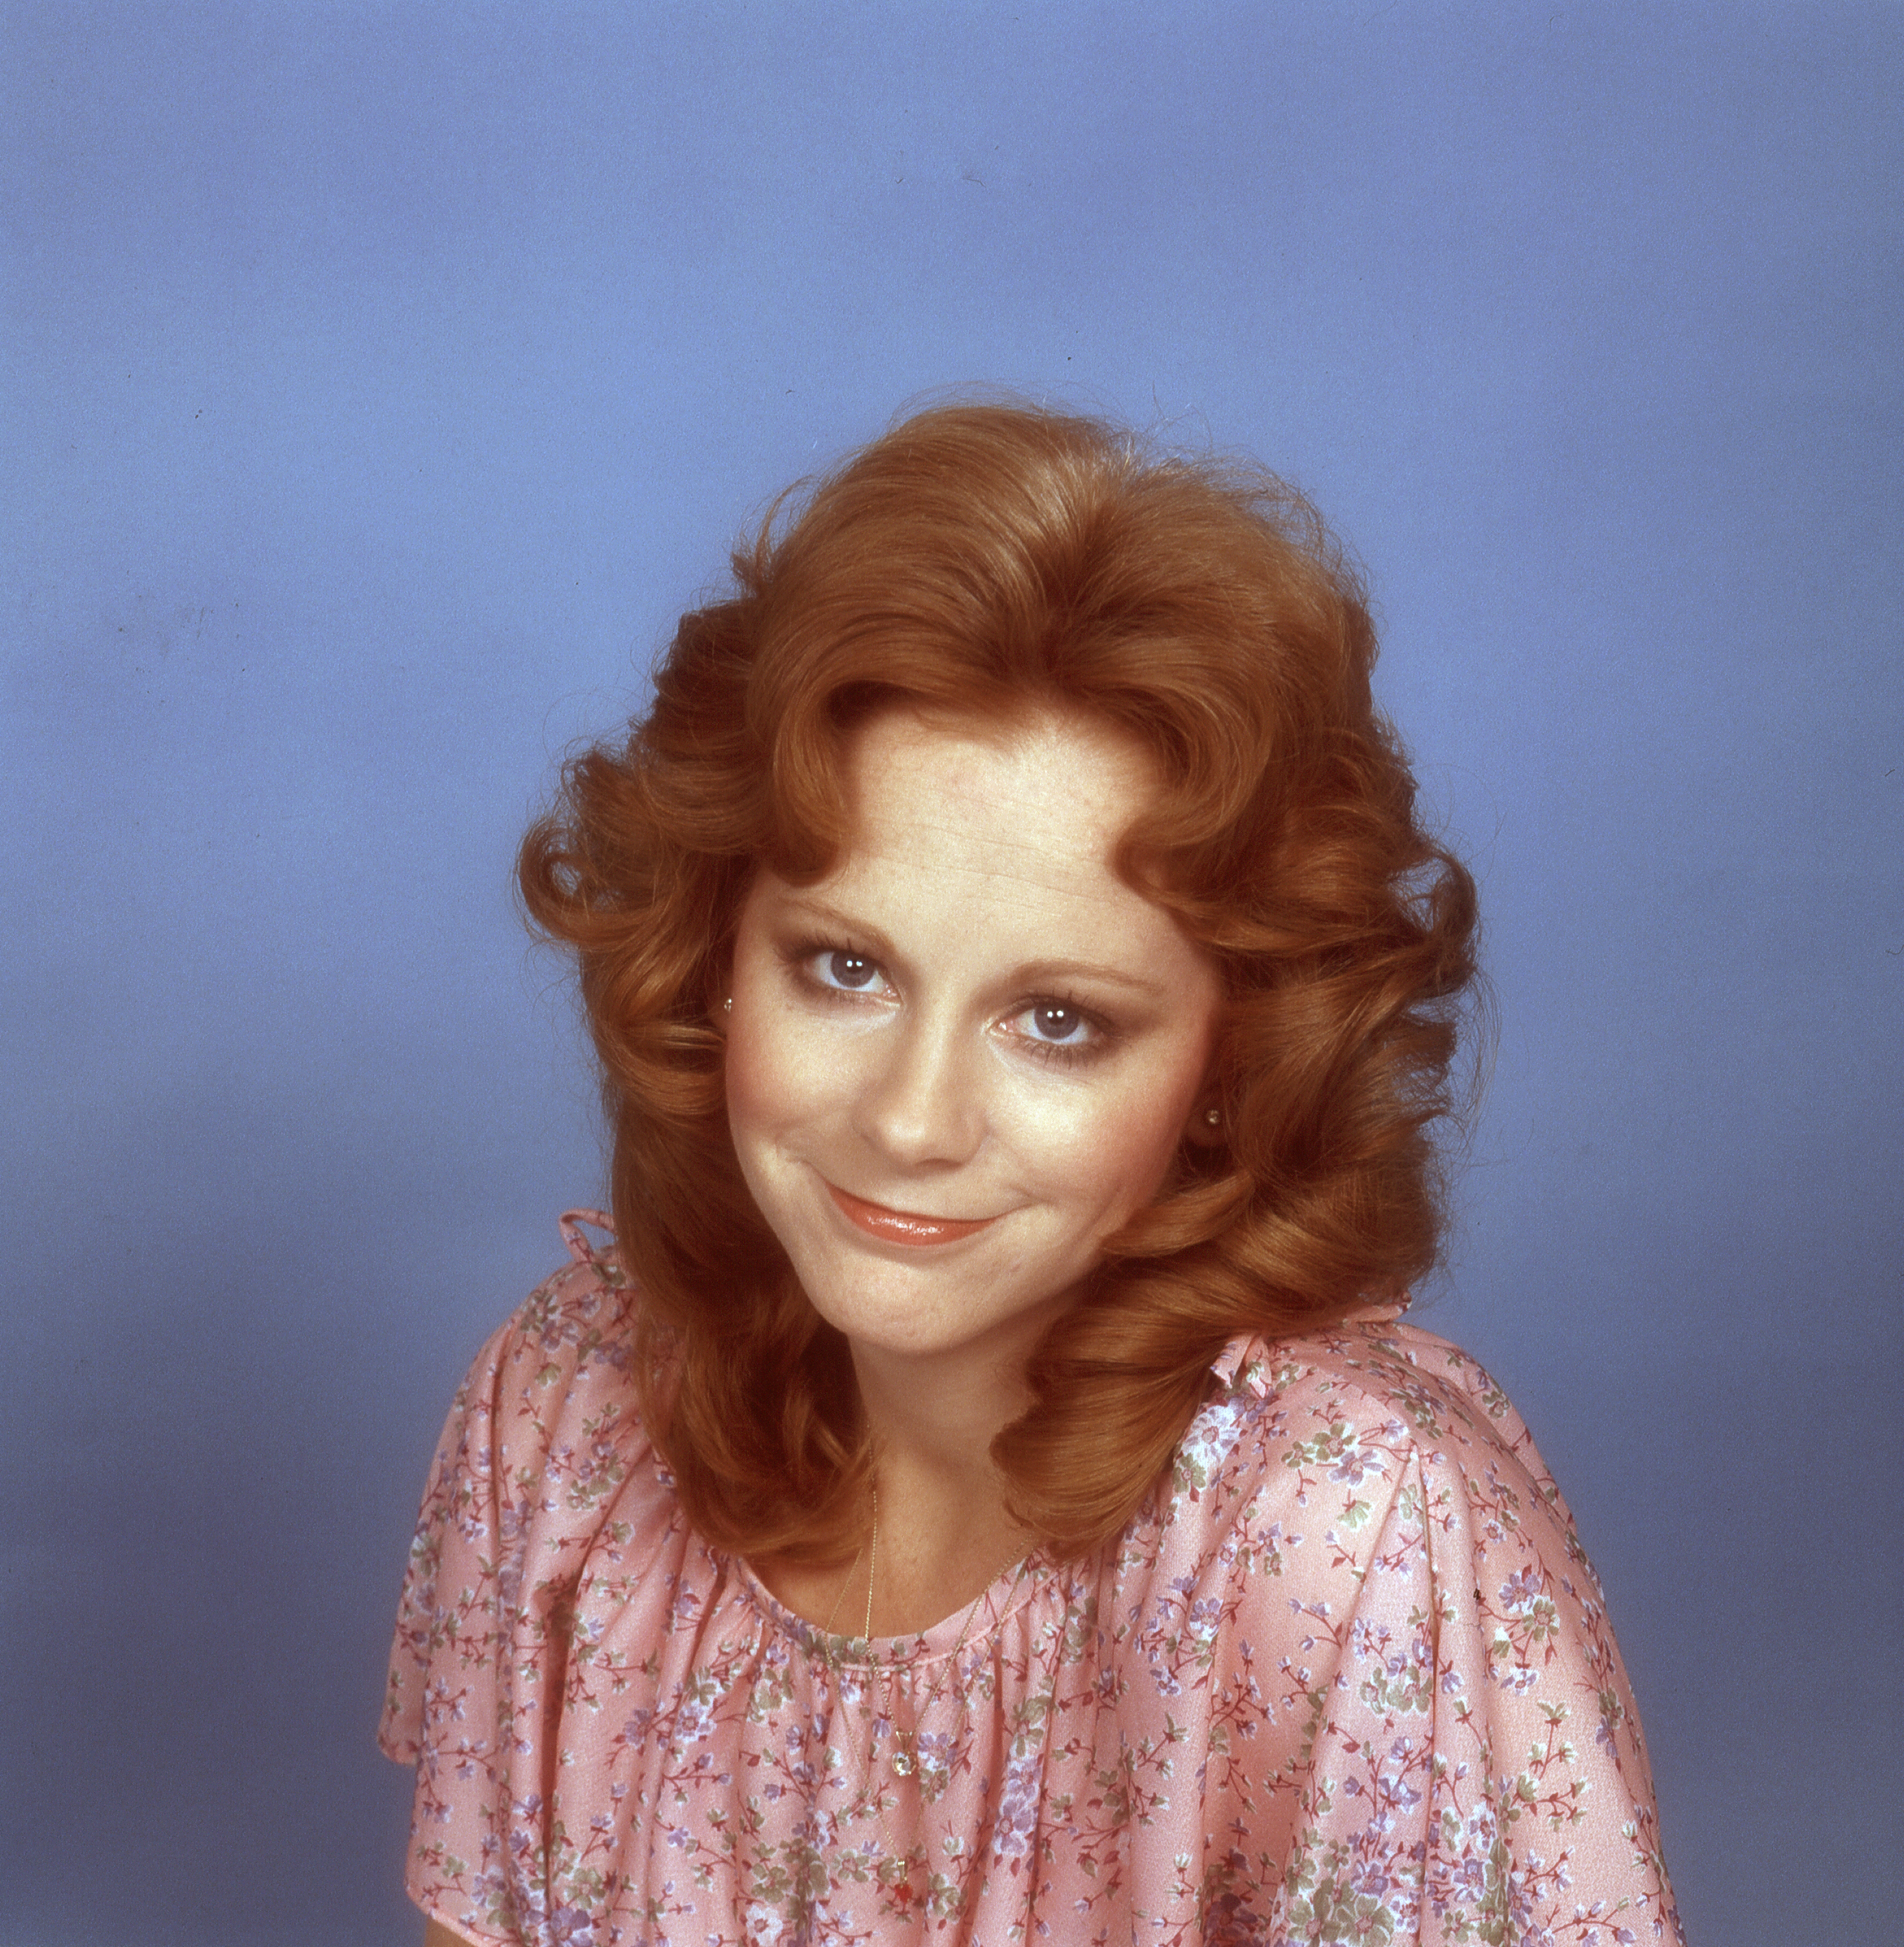 Reba McEntire in Nashville, Tennessee in circa 1976 | Source: Getty Images